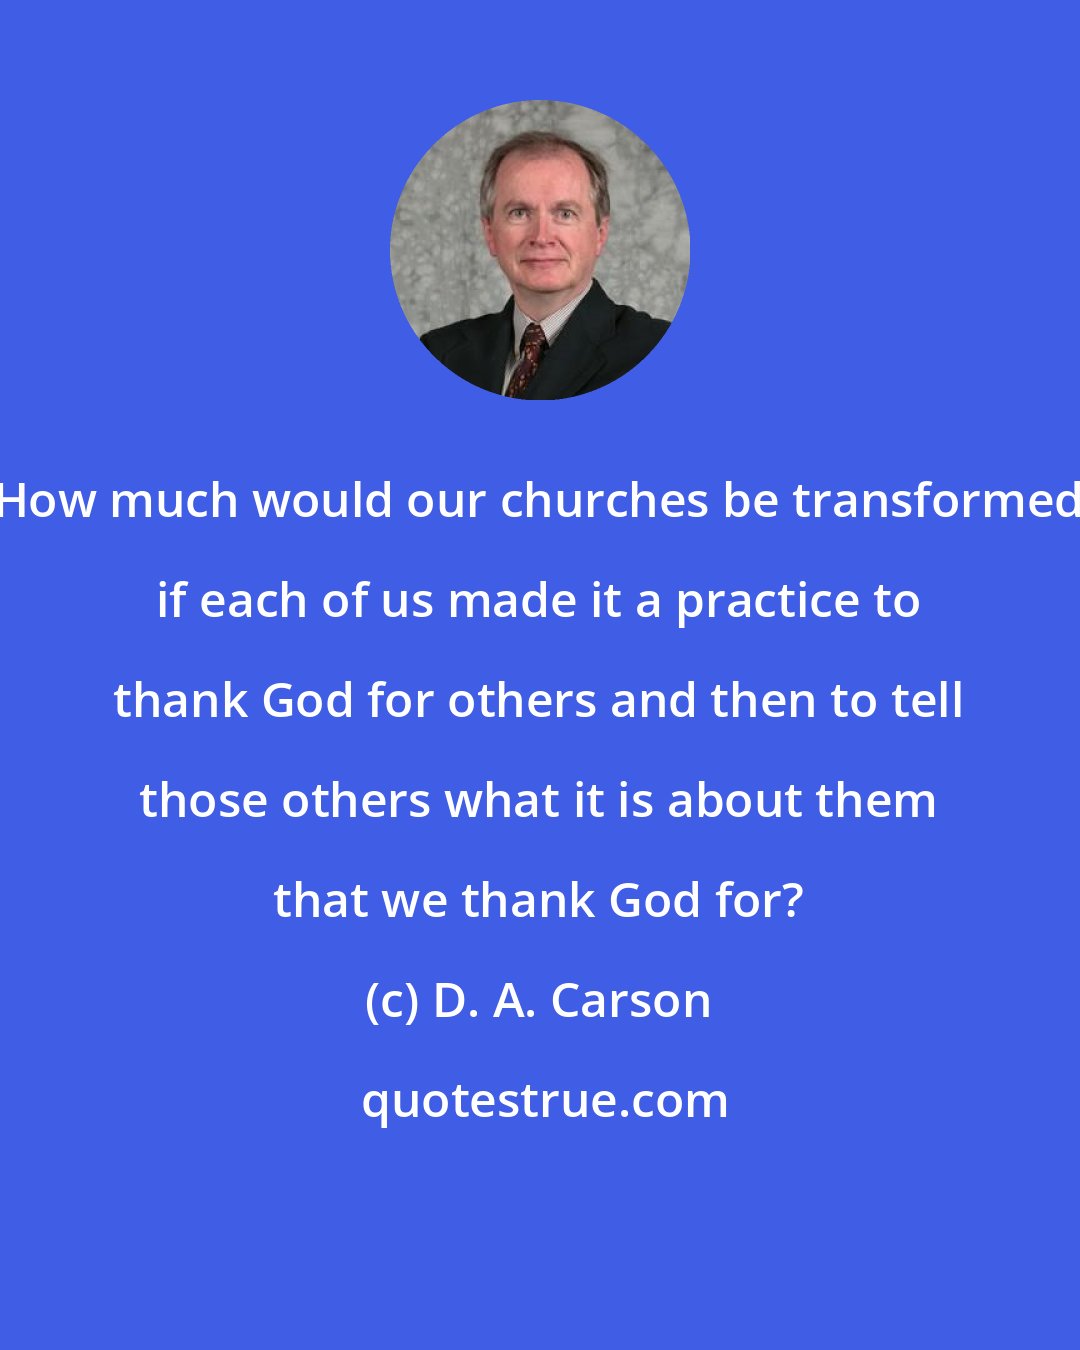 D. A. Carson: How much would our churches be transformed if each of us made it a practice to thank God for others and then to tell those others what it is about them that we thank God for?